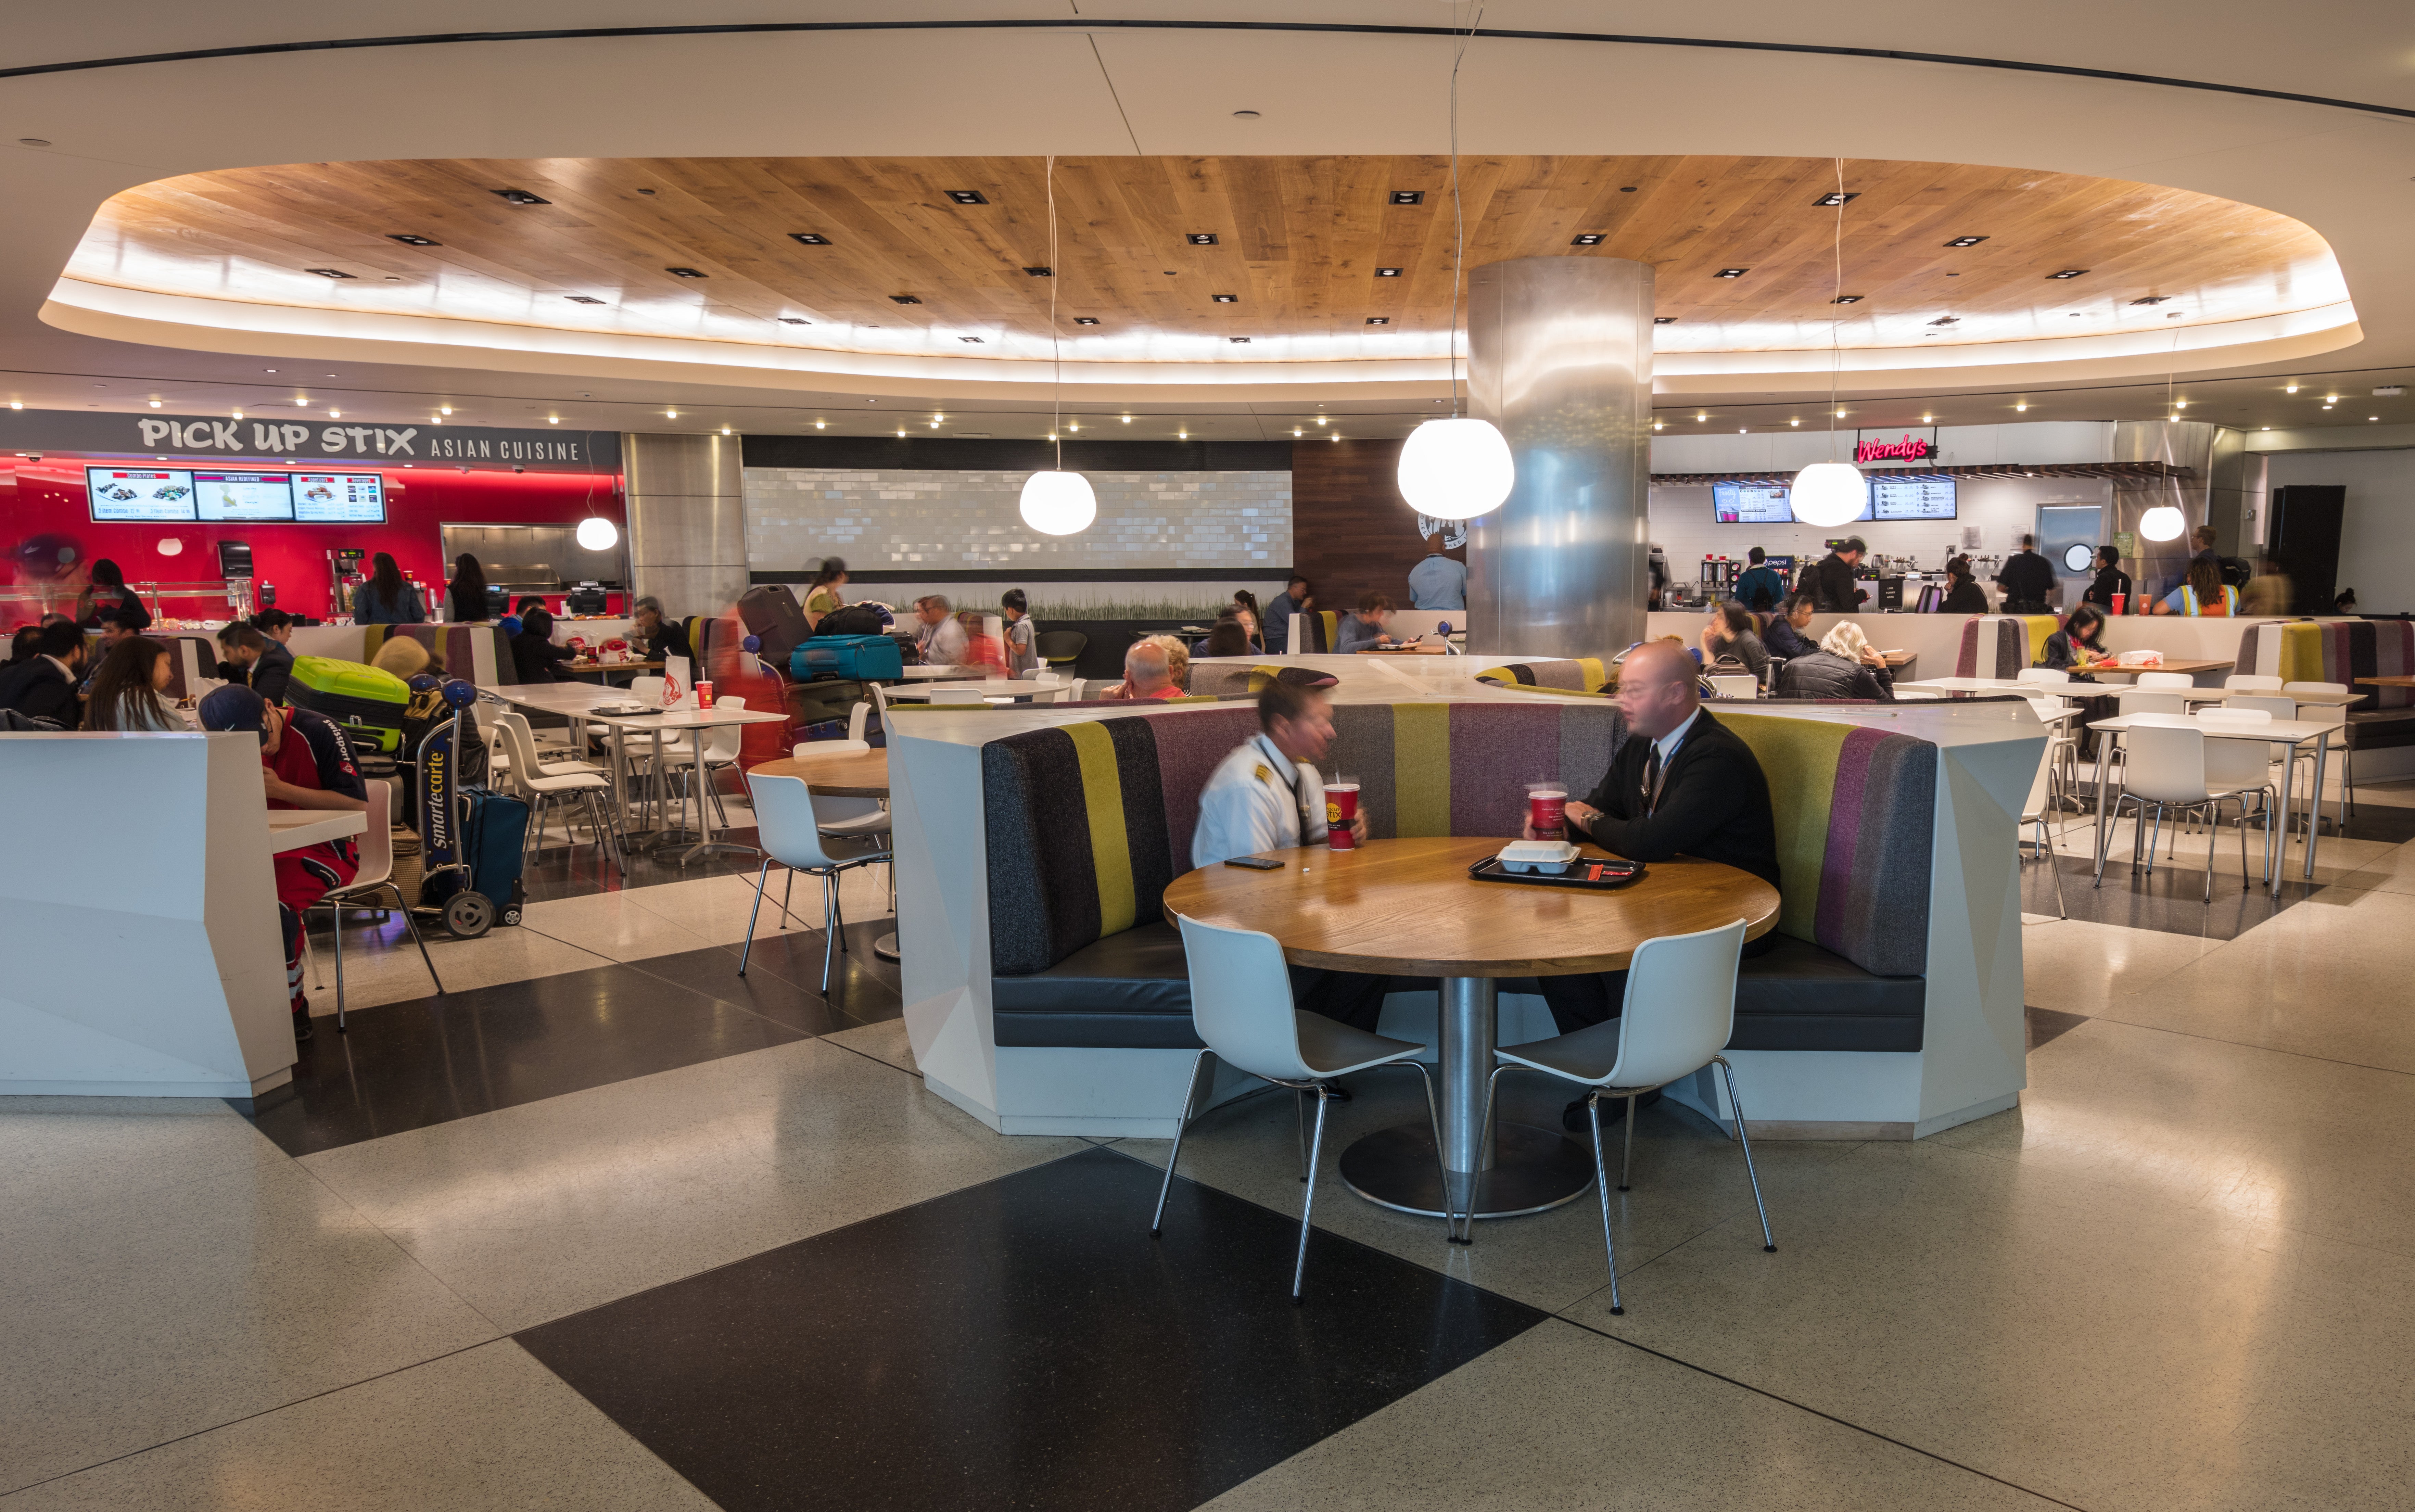 10 airport restaurants so good you won’t want to leave the terminal